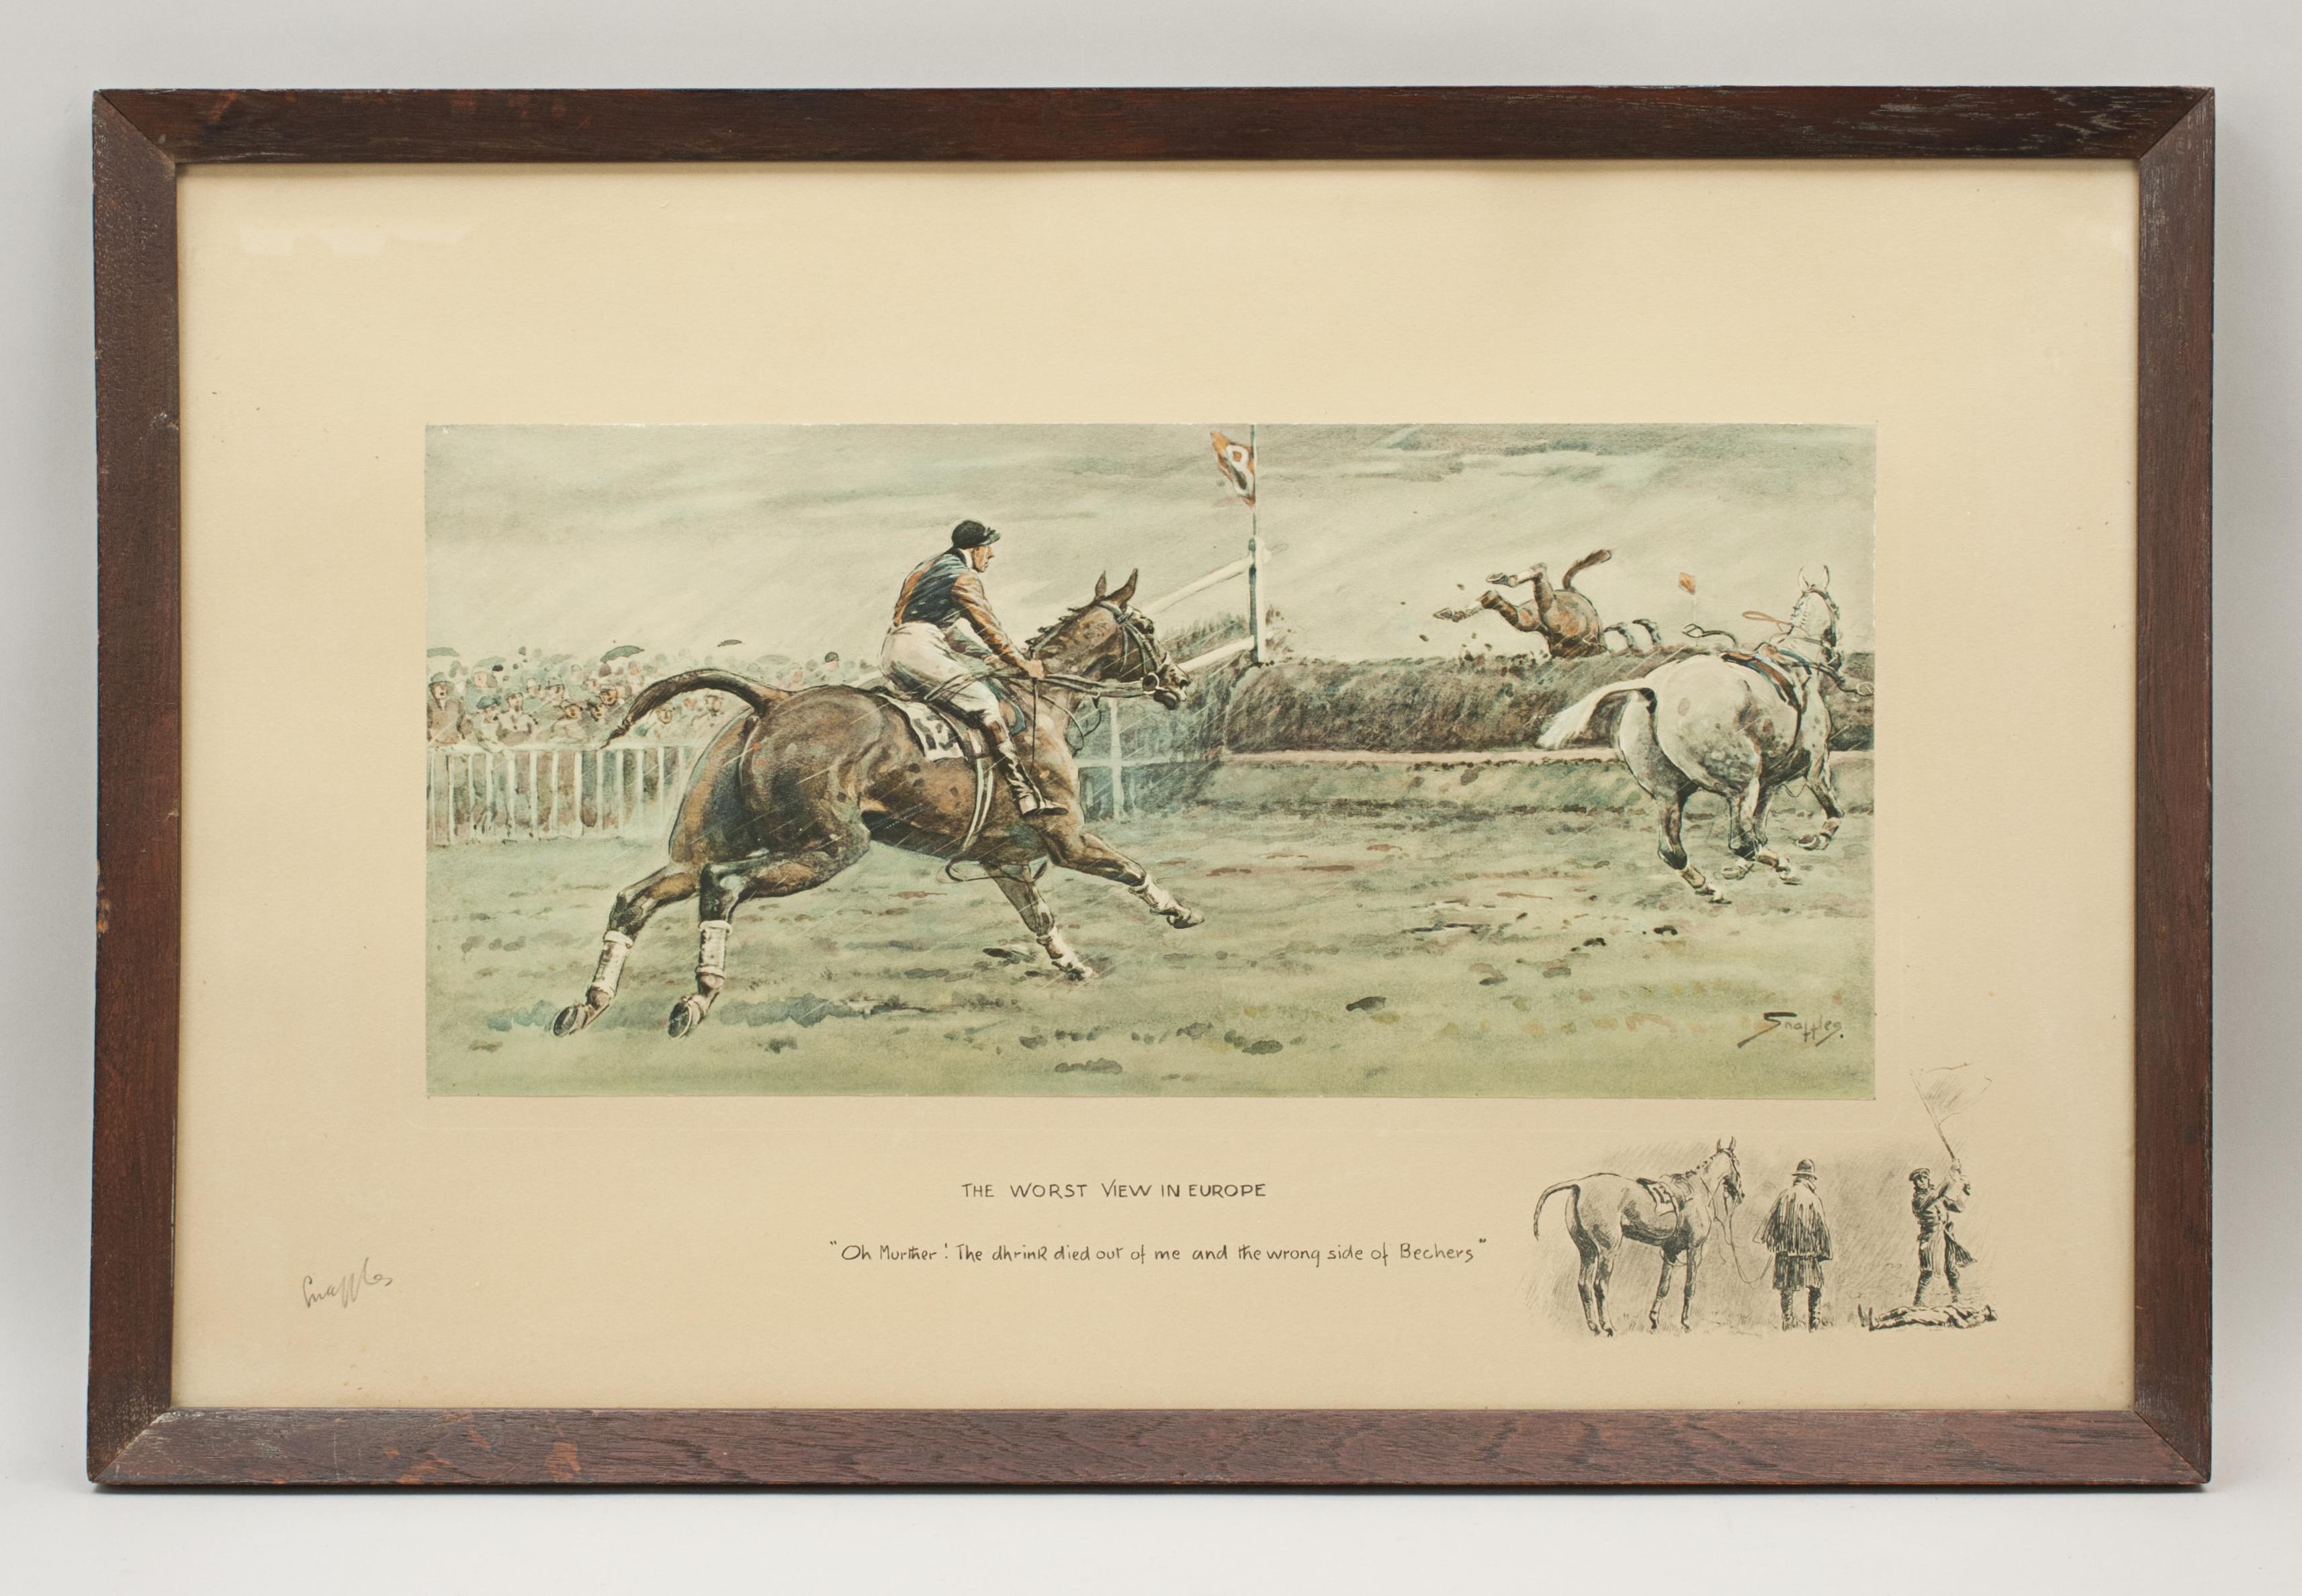 Vintage snaffles horse racing print, worst view in Europe.
A snaffles photolithograph entitled 'Worst View In Europe' with secondary caption 